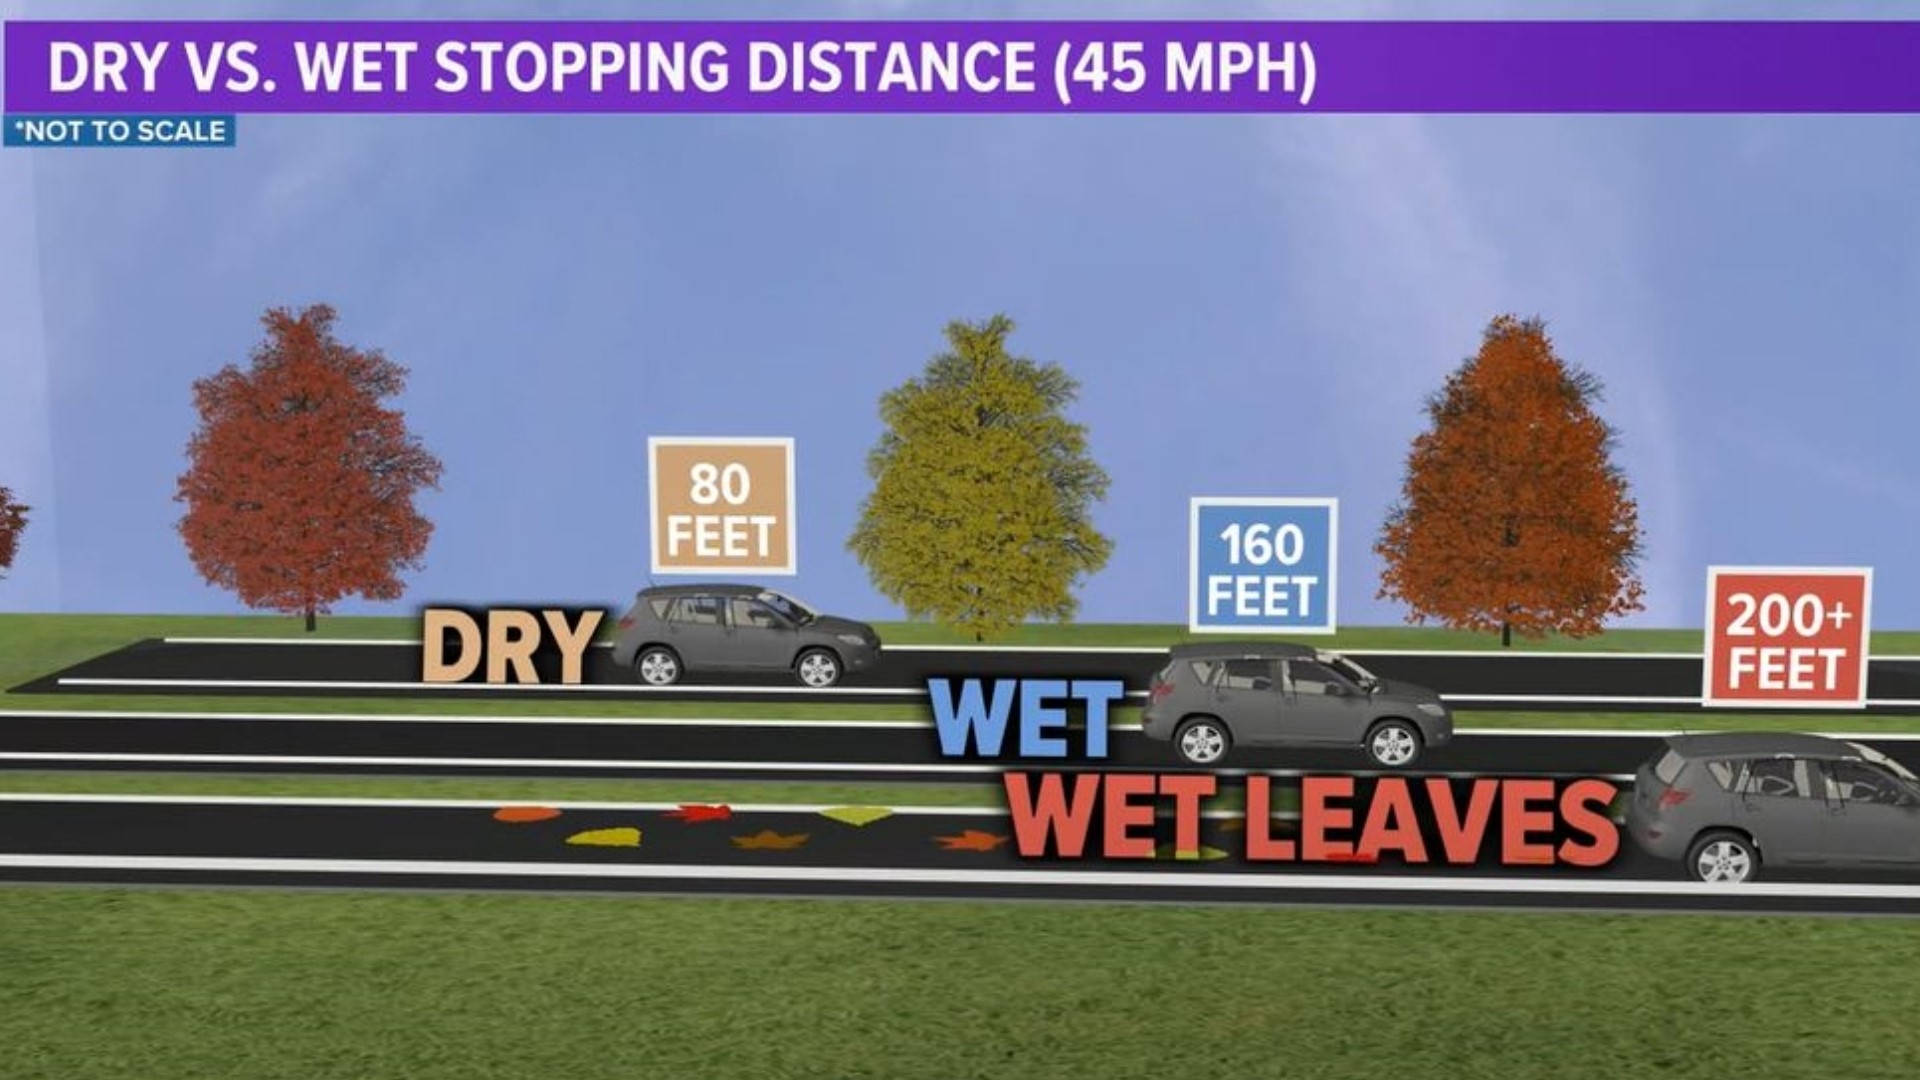 The leaves can increase the distance it takes your car to stop, as well as clog up storm drains and make the roads